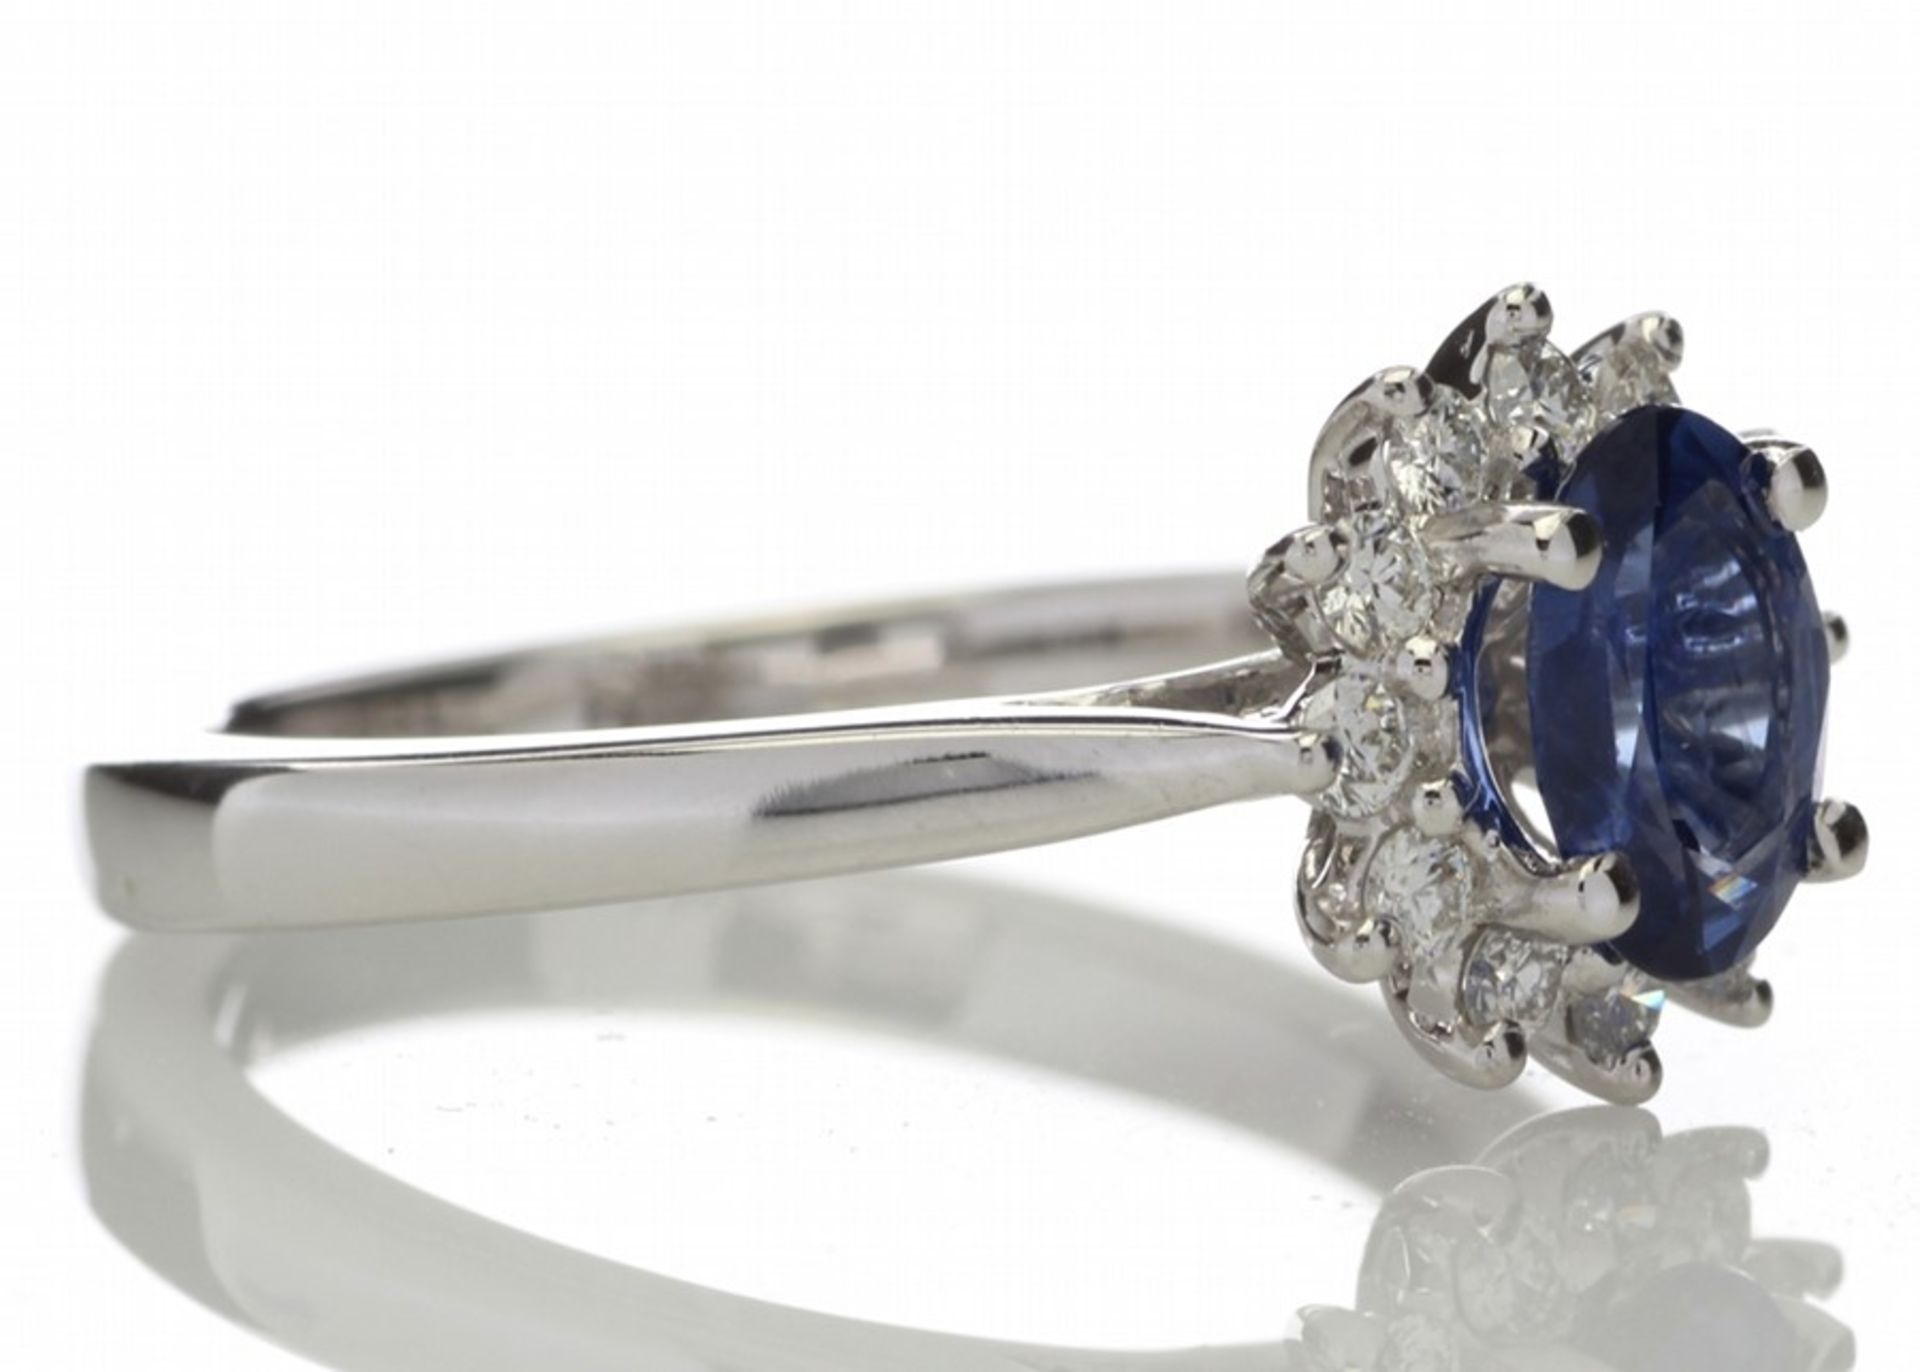 Valued by GIE £11,150.00 - 18ct White Gold Diamond And Sapphire Cluster Ring (S0.82) 0.25 Carats - - Image 4 of 5